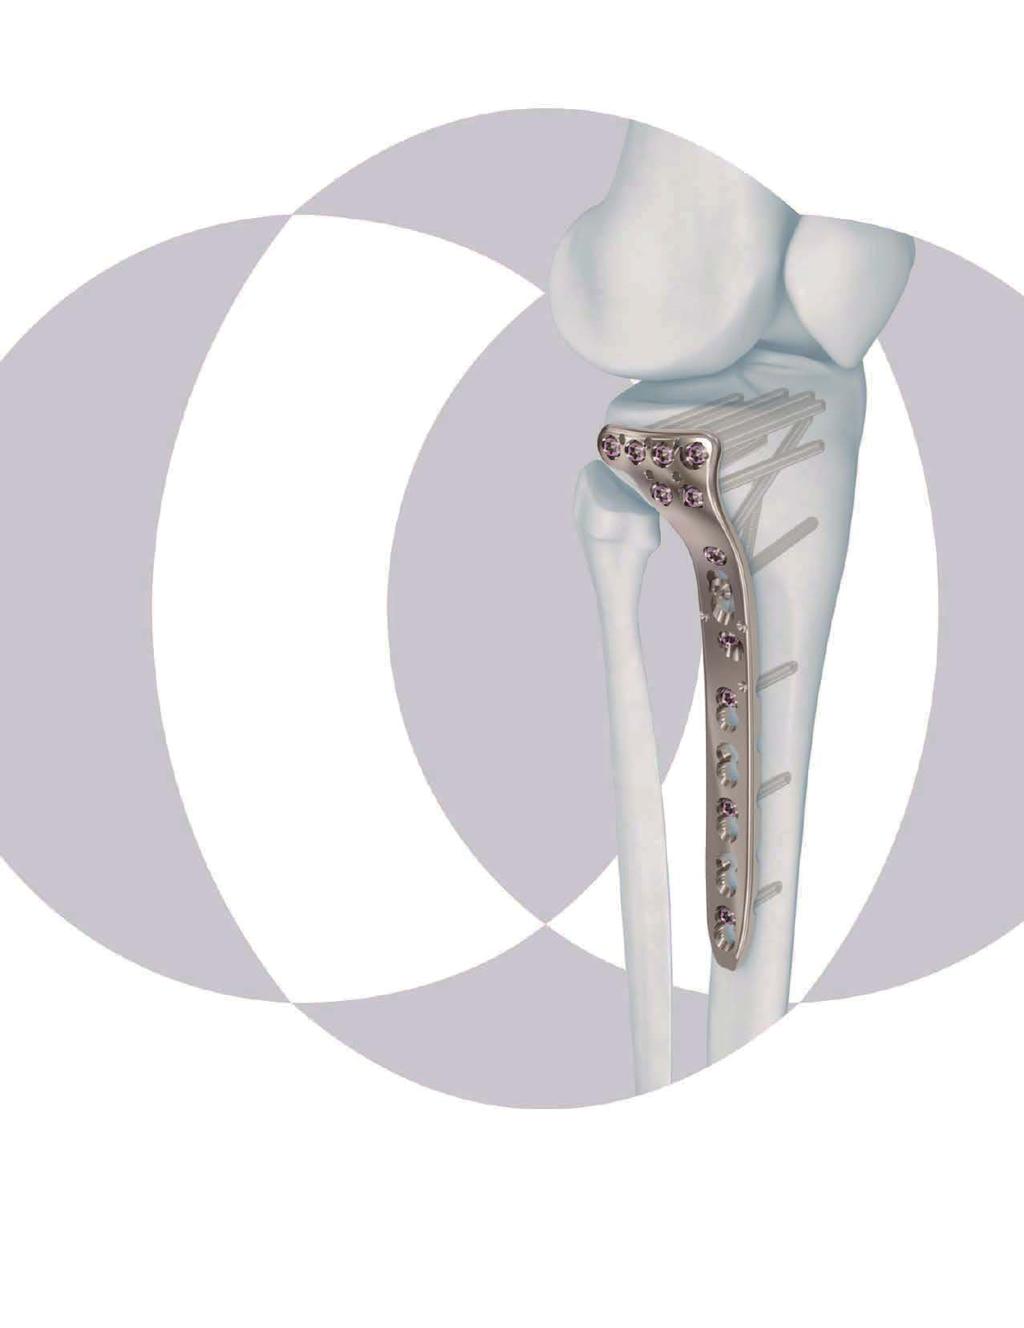 3.5 MM VA-LCP PROXIMAL TIBIA PLATE SYSTEM Part of the DePuy